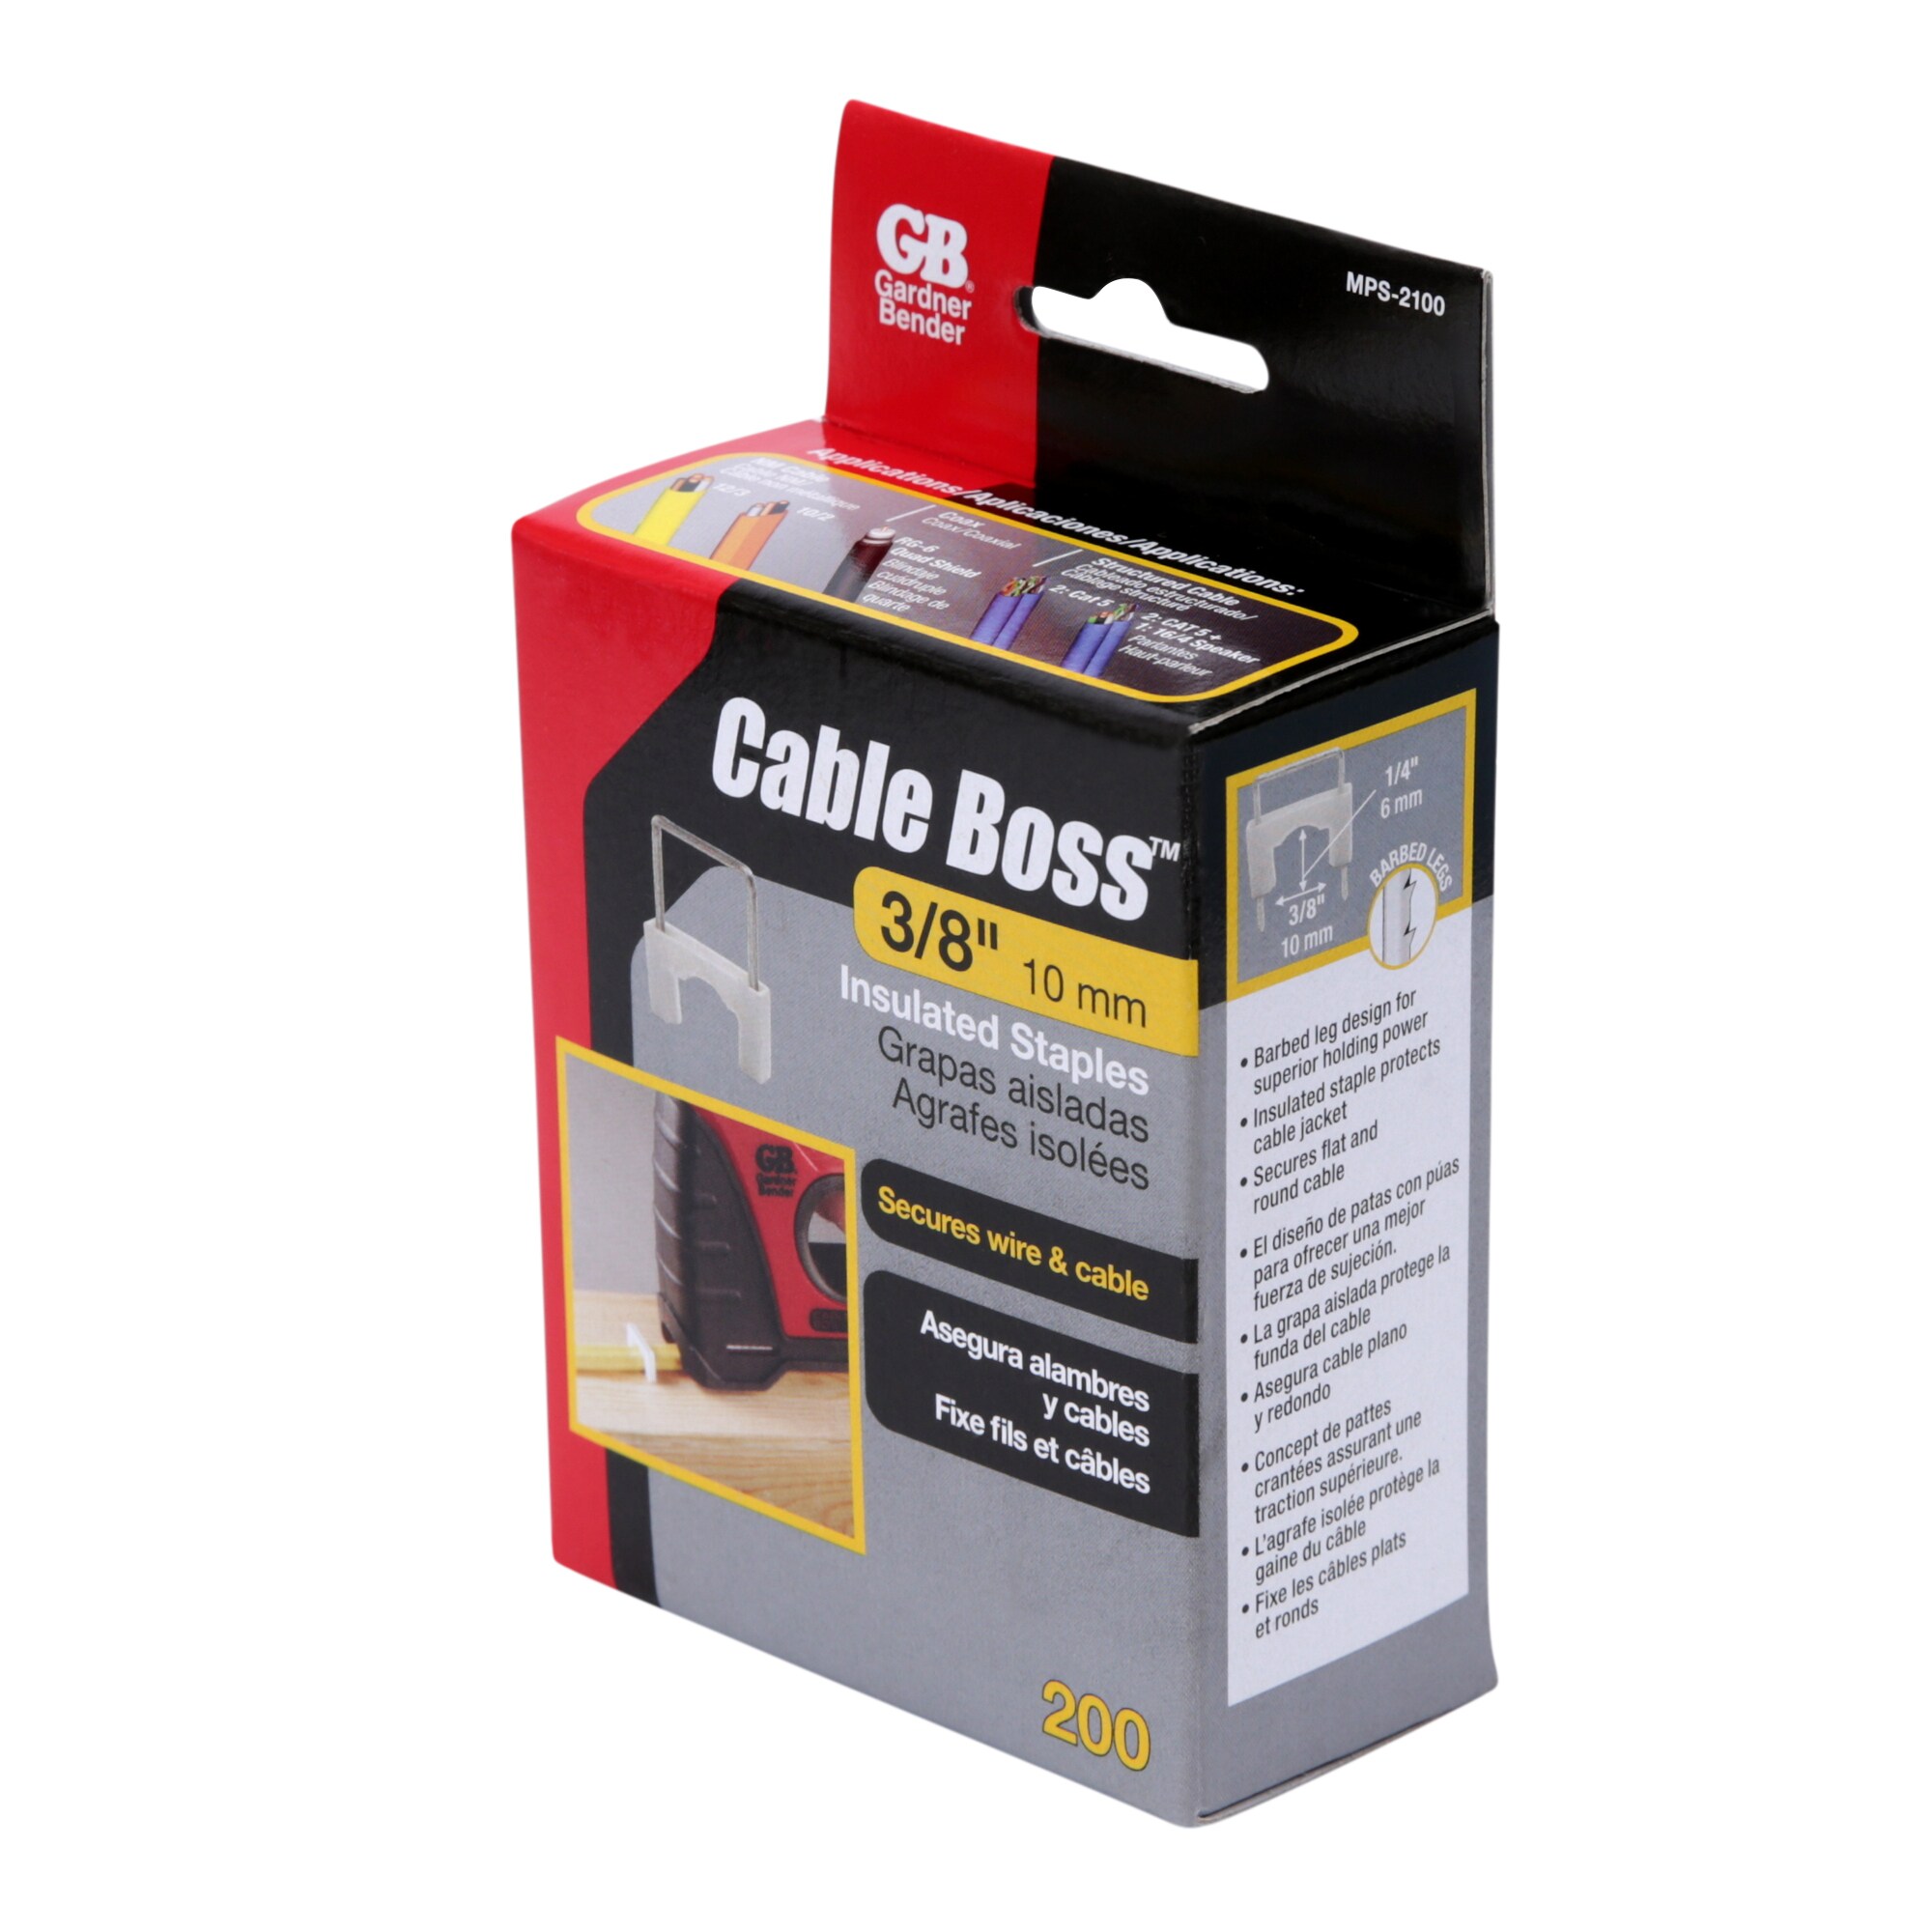 Details about   GB Gardner Bender MPS-2080 5/16 Blue Cable Boss™ Cable Staples 250 Box 